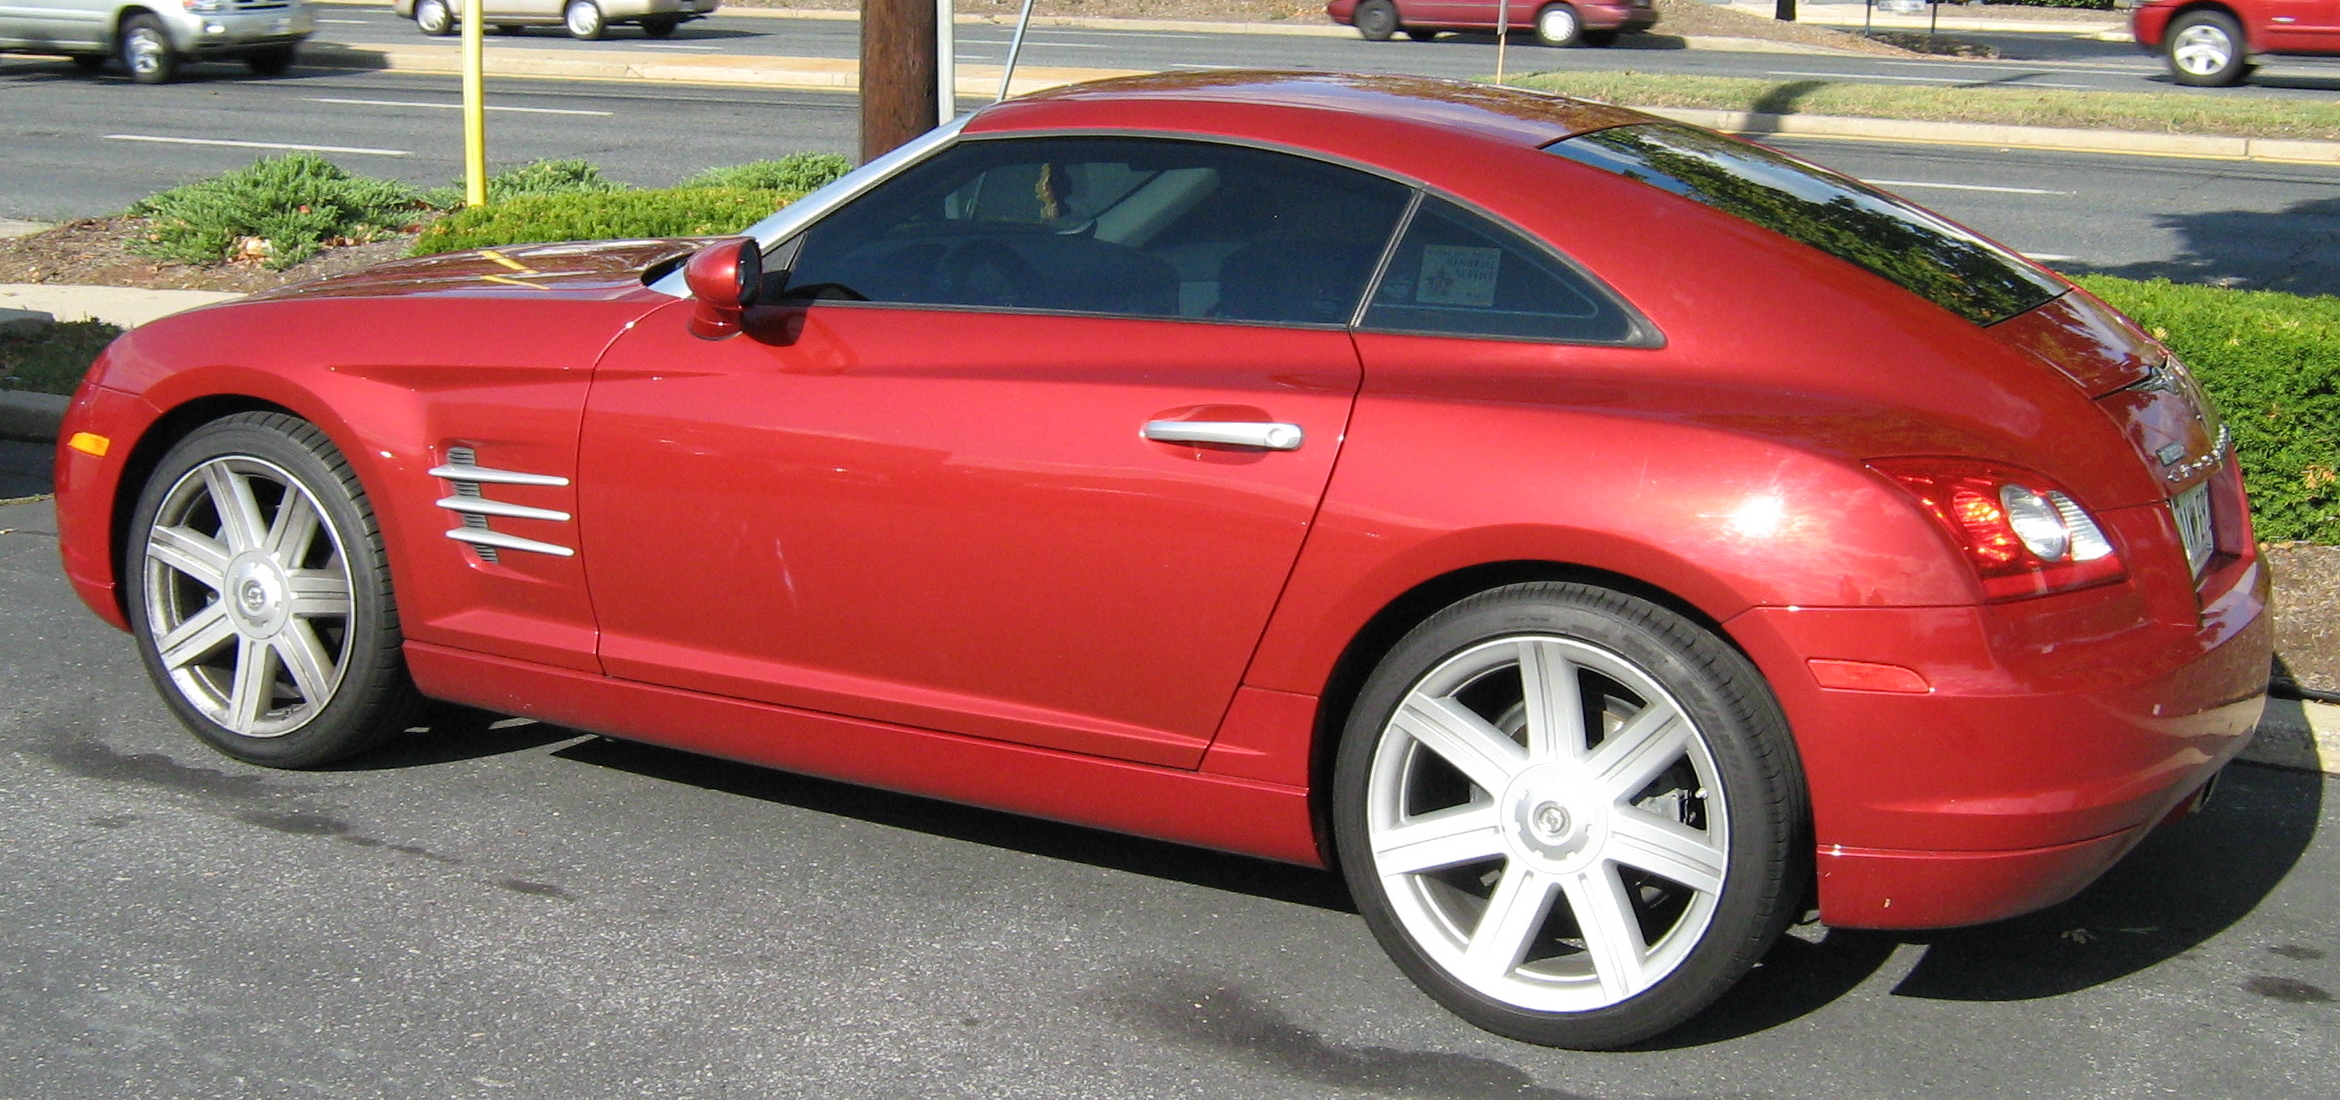 File:Chrysler Crossfire Red Coupe2.JPG - Wikipedia